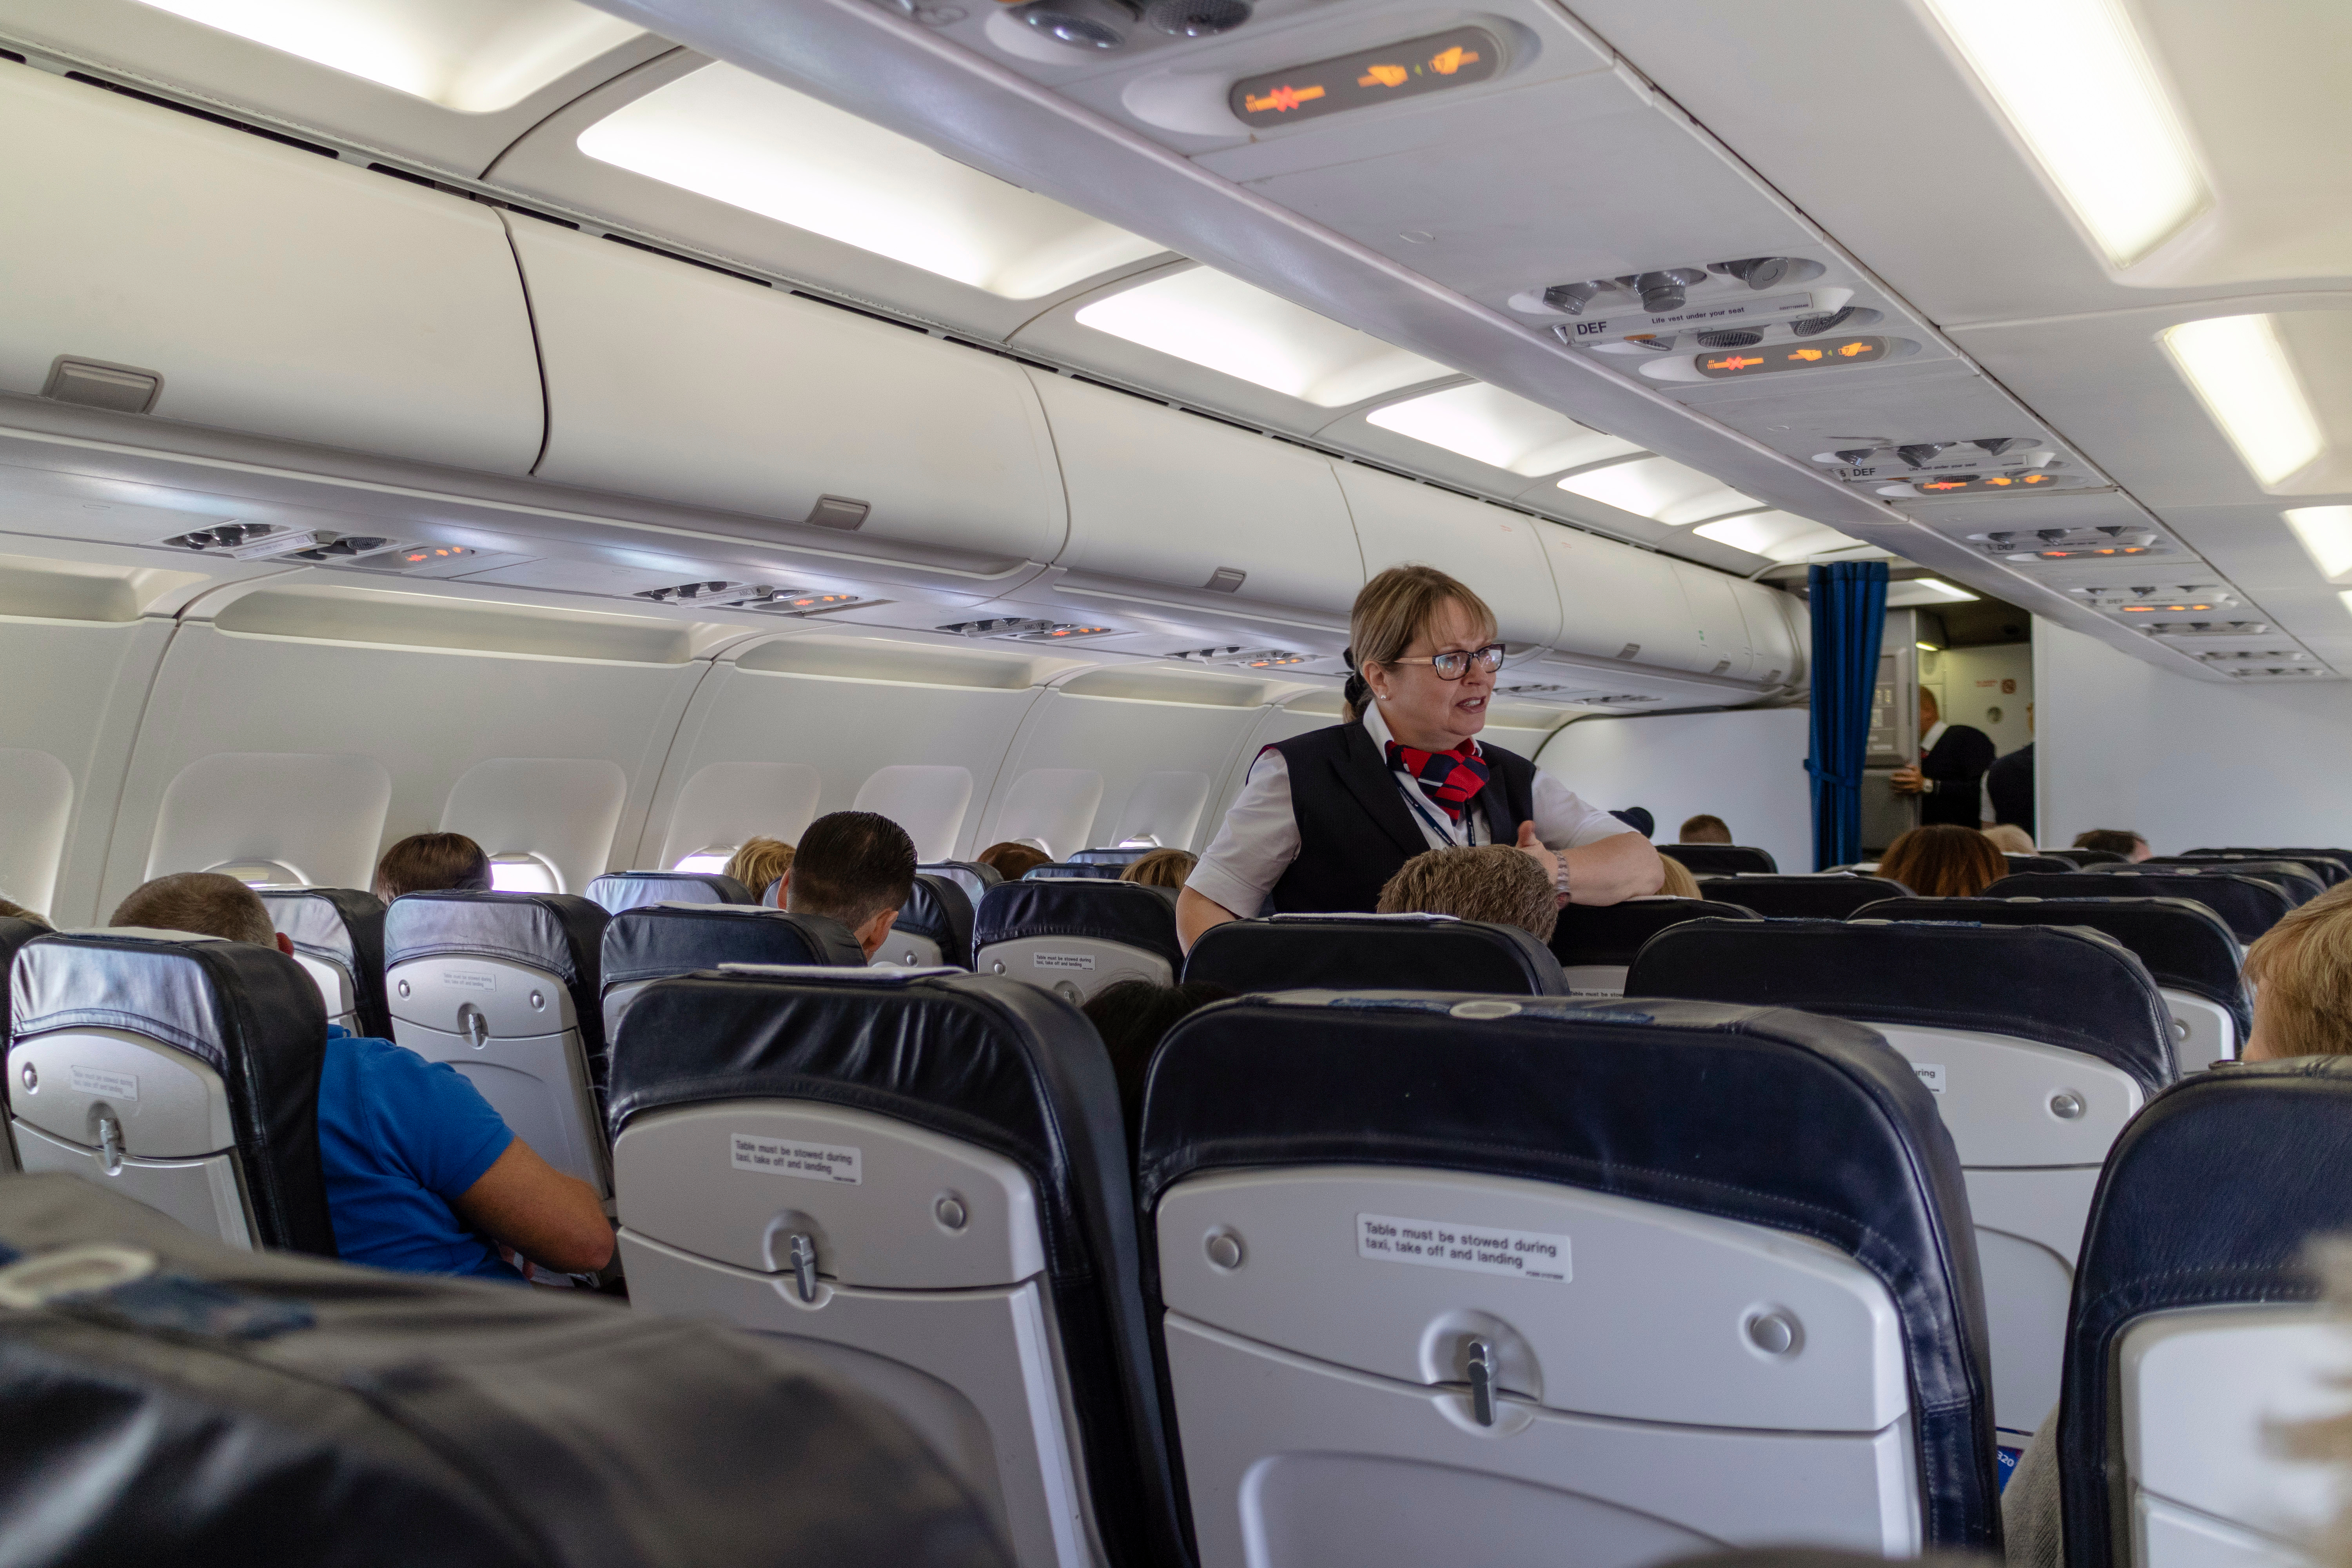 Inflight service on a passenger plane with a crew member speaking to a passenger | Source: Shutterstock